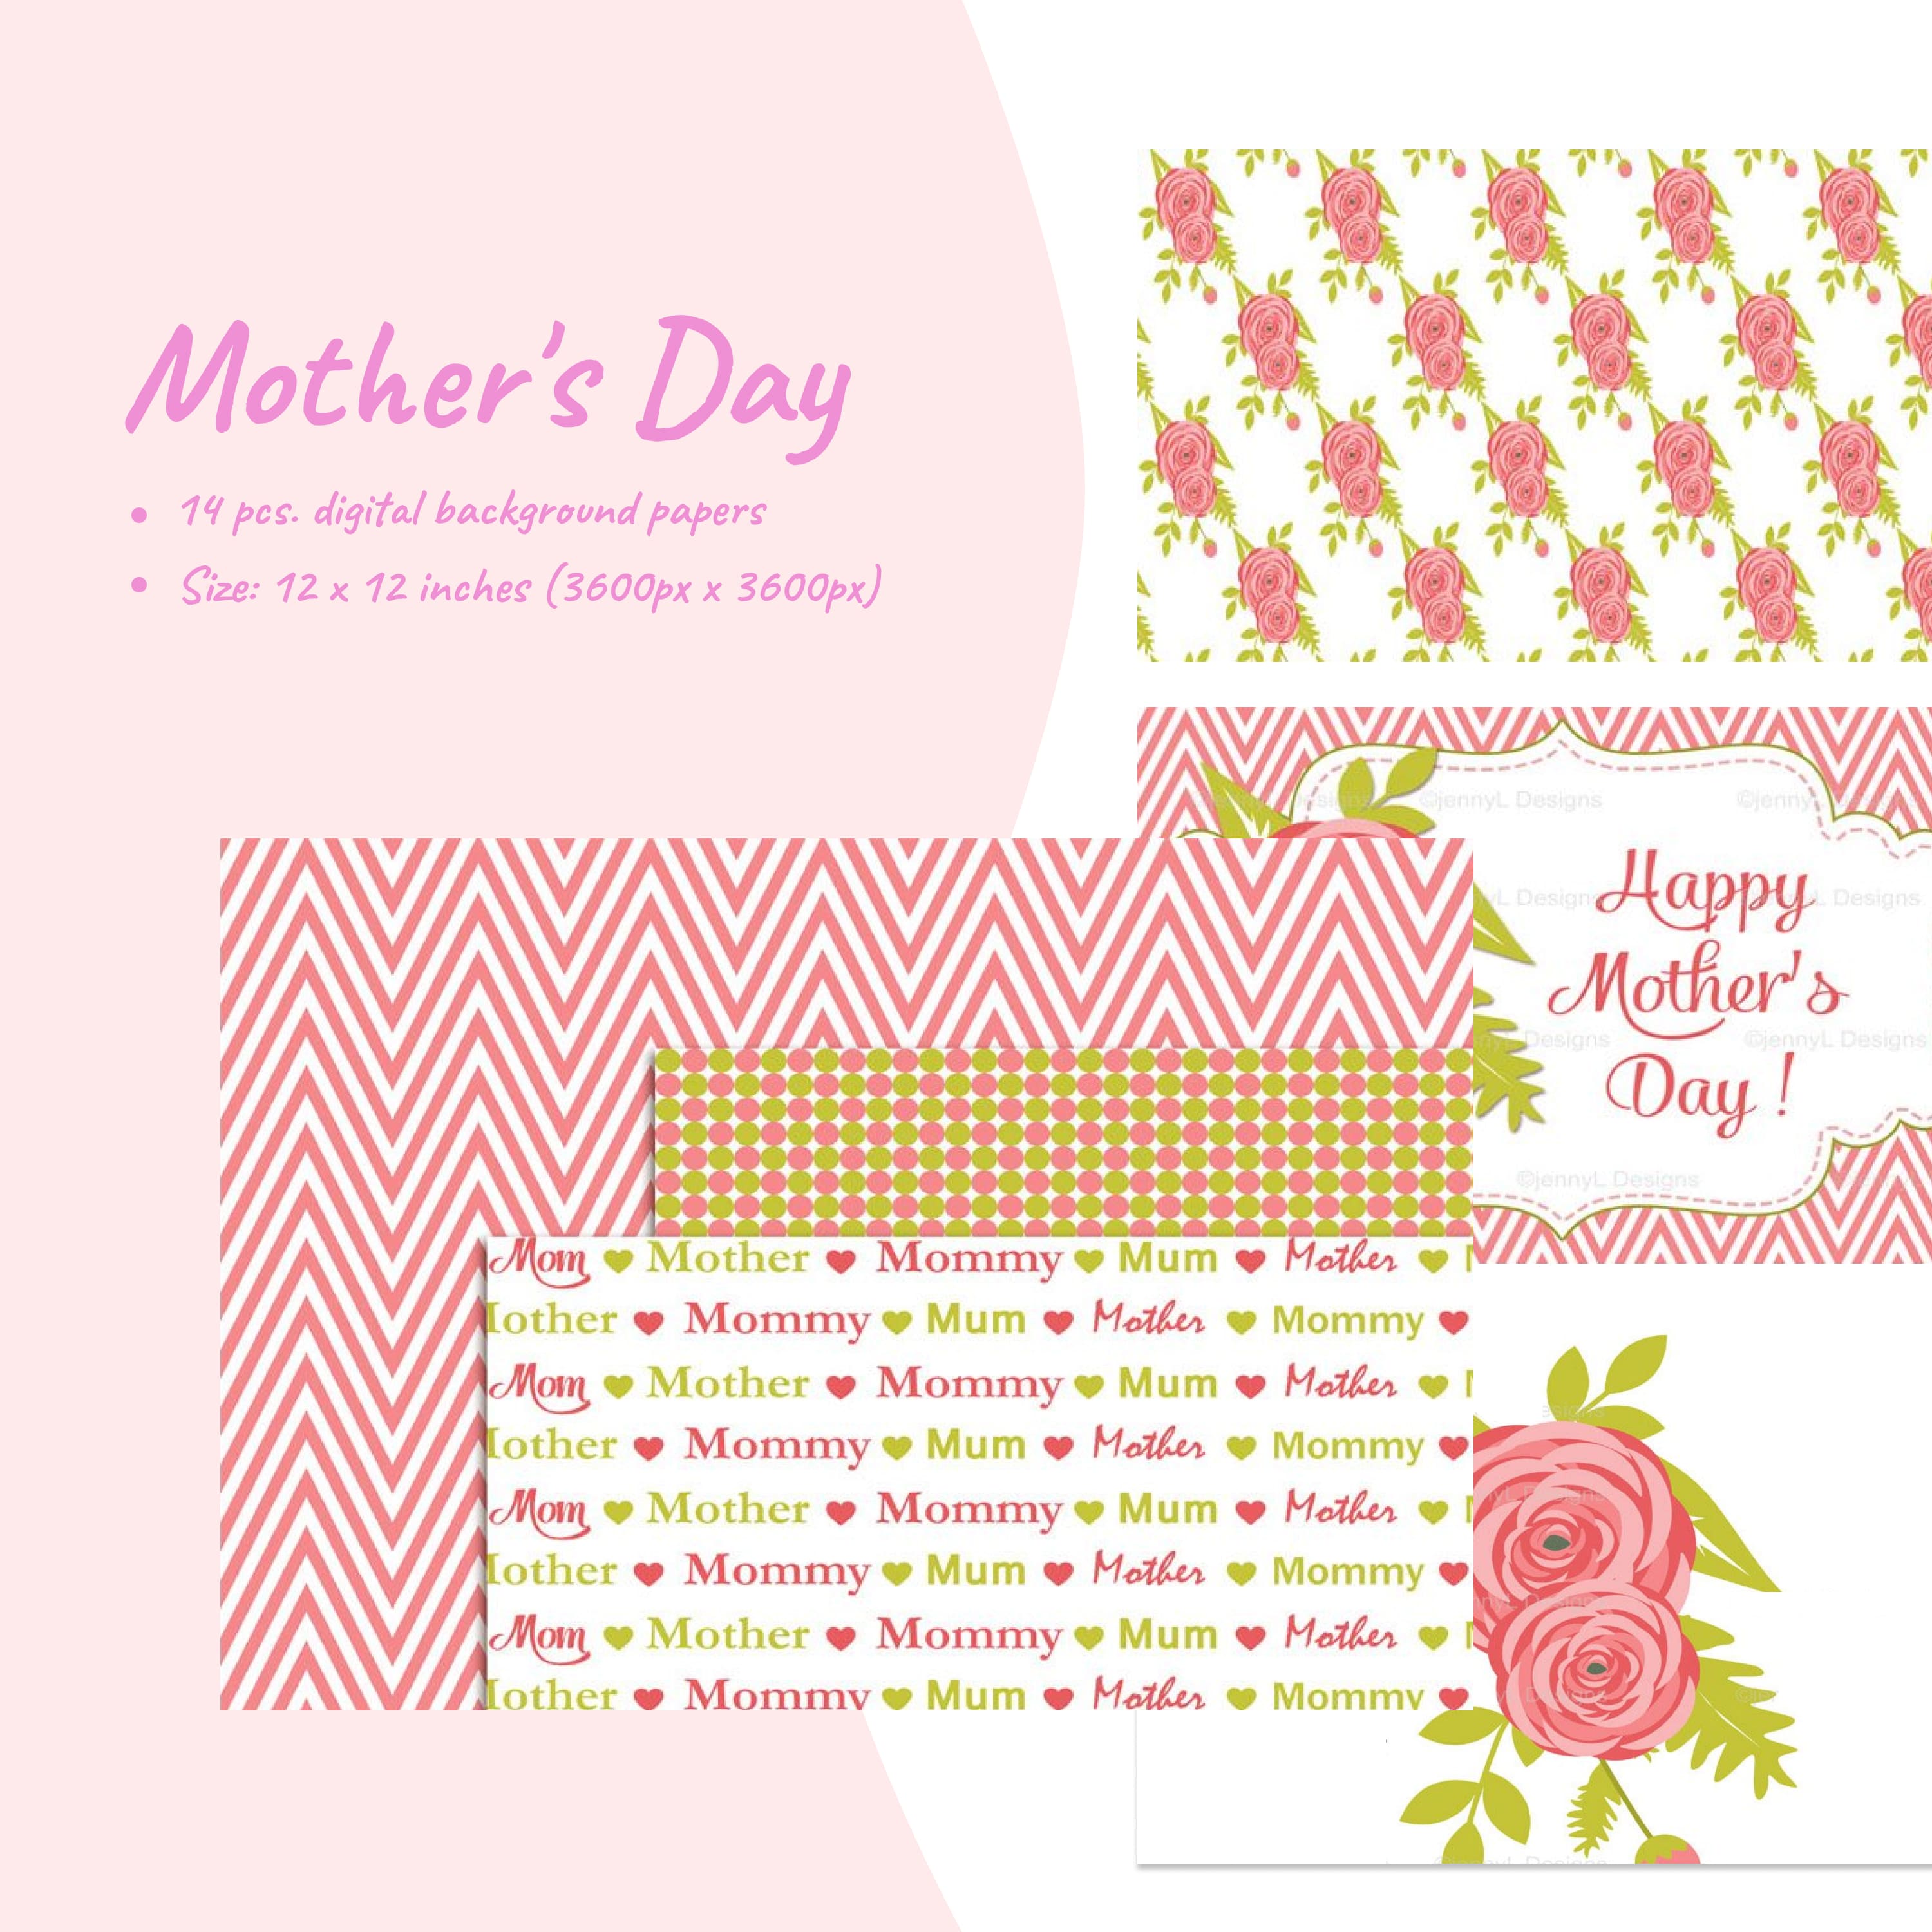 Mother's Day Digital Papers.